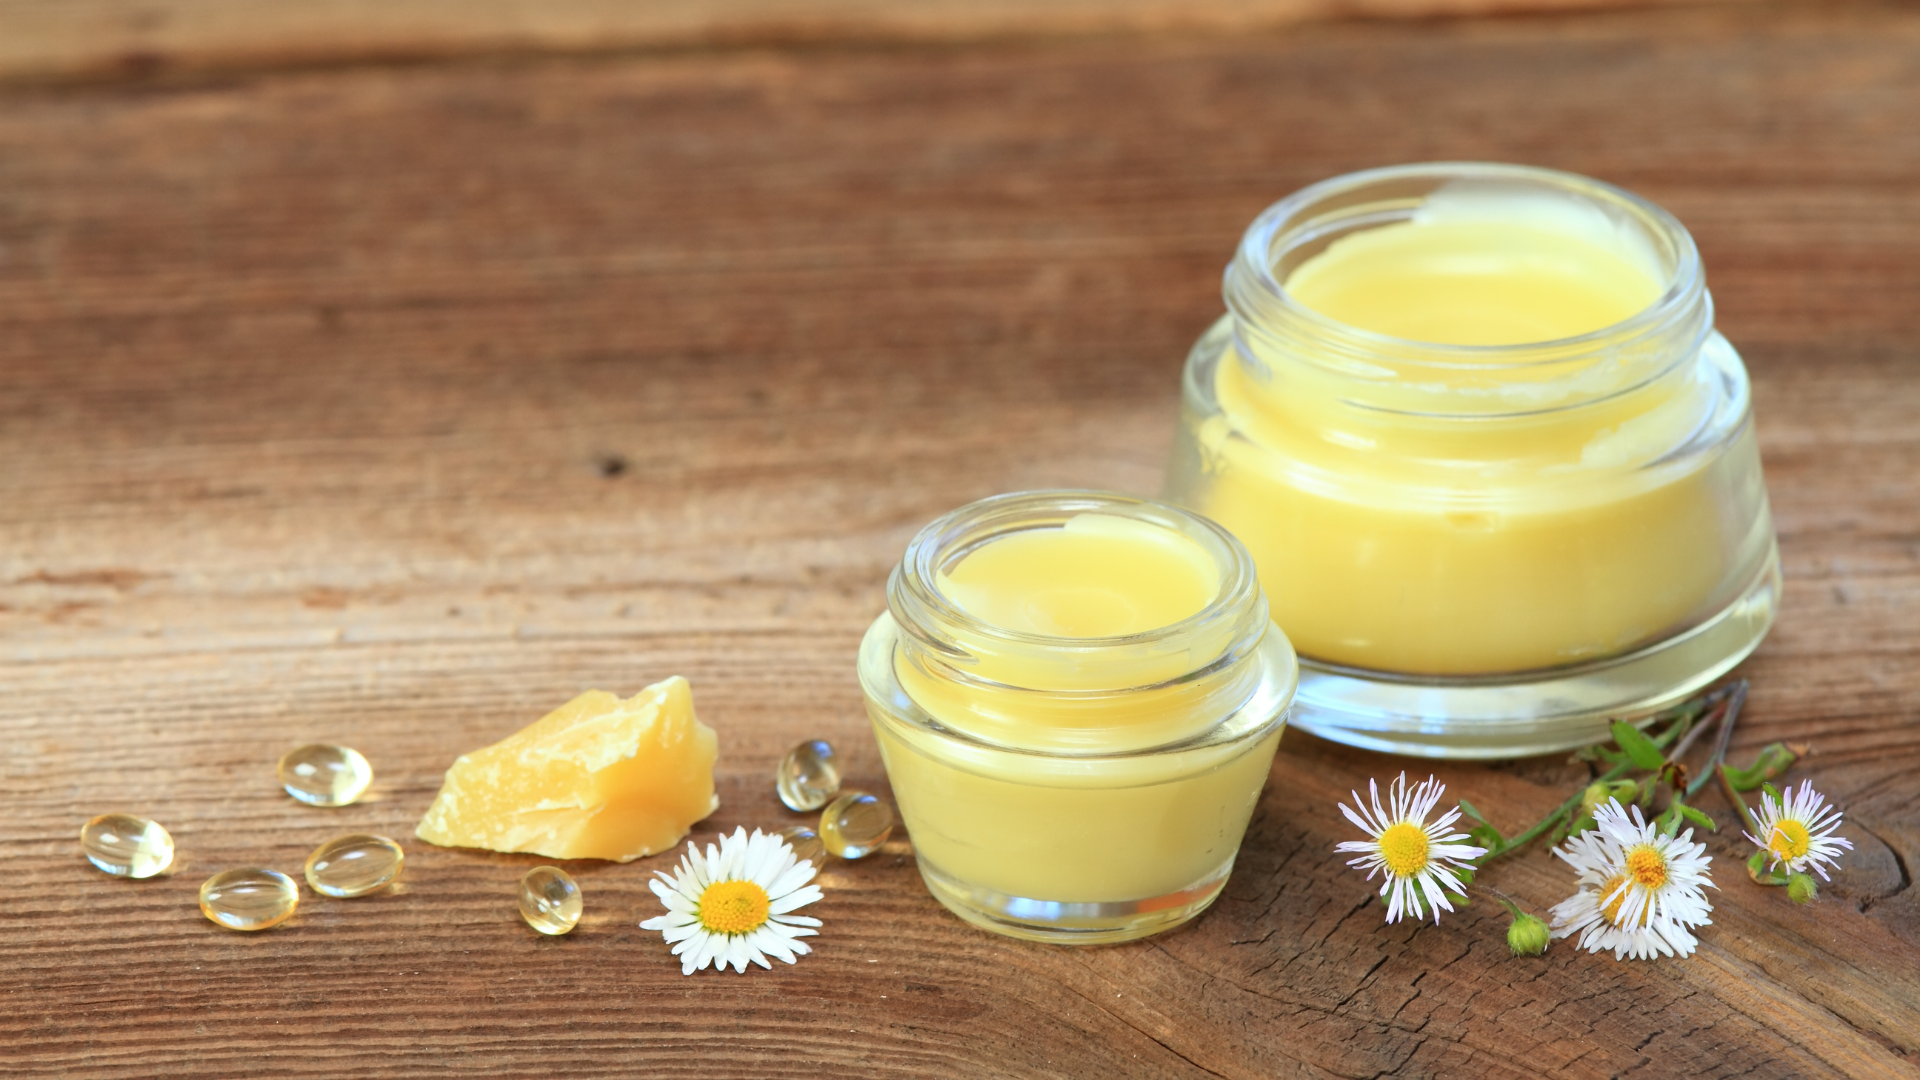 Yellow balm in a jar on a wooden background